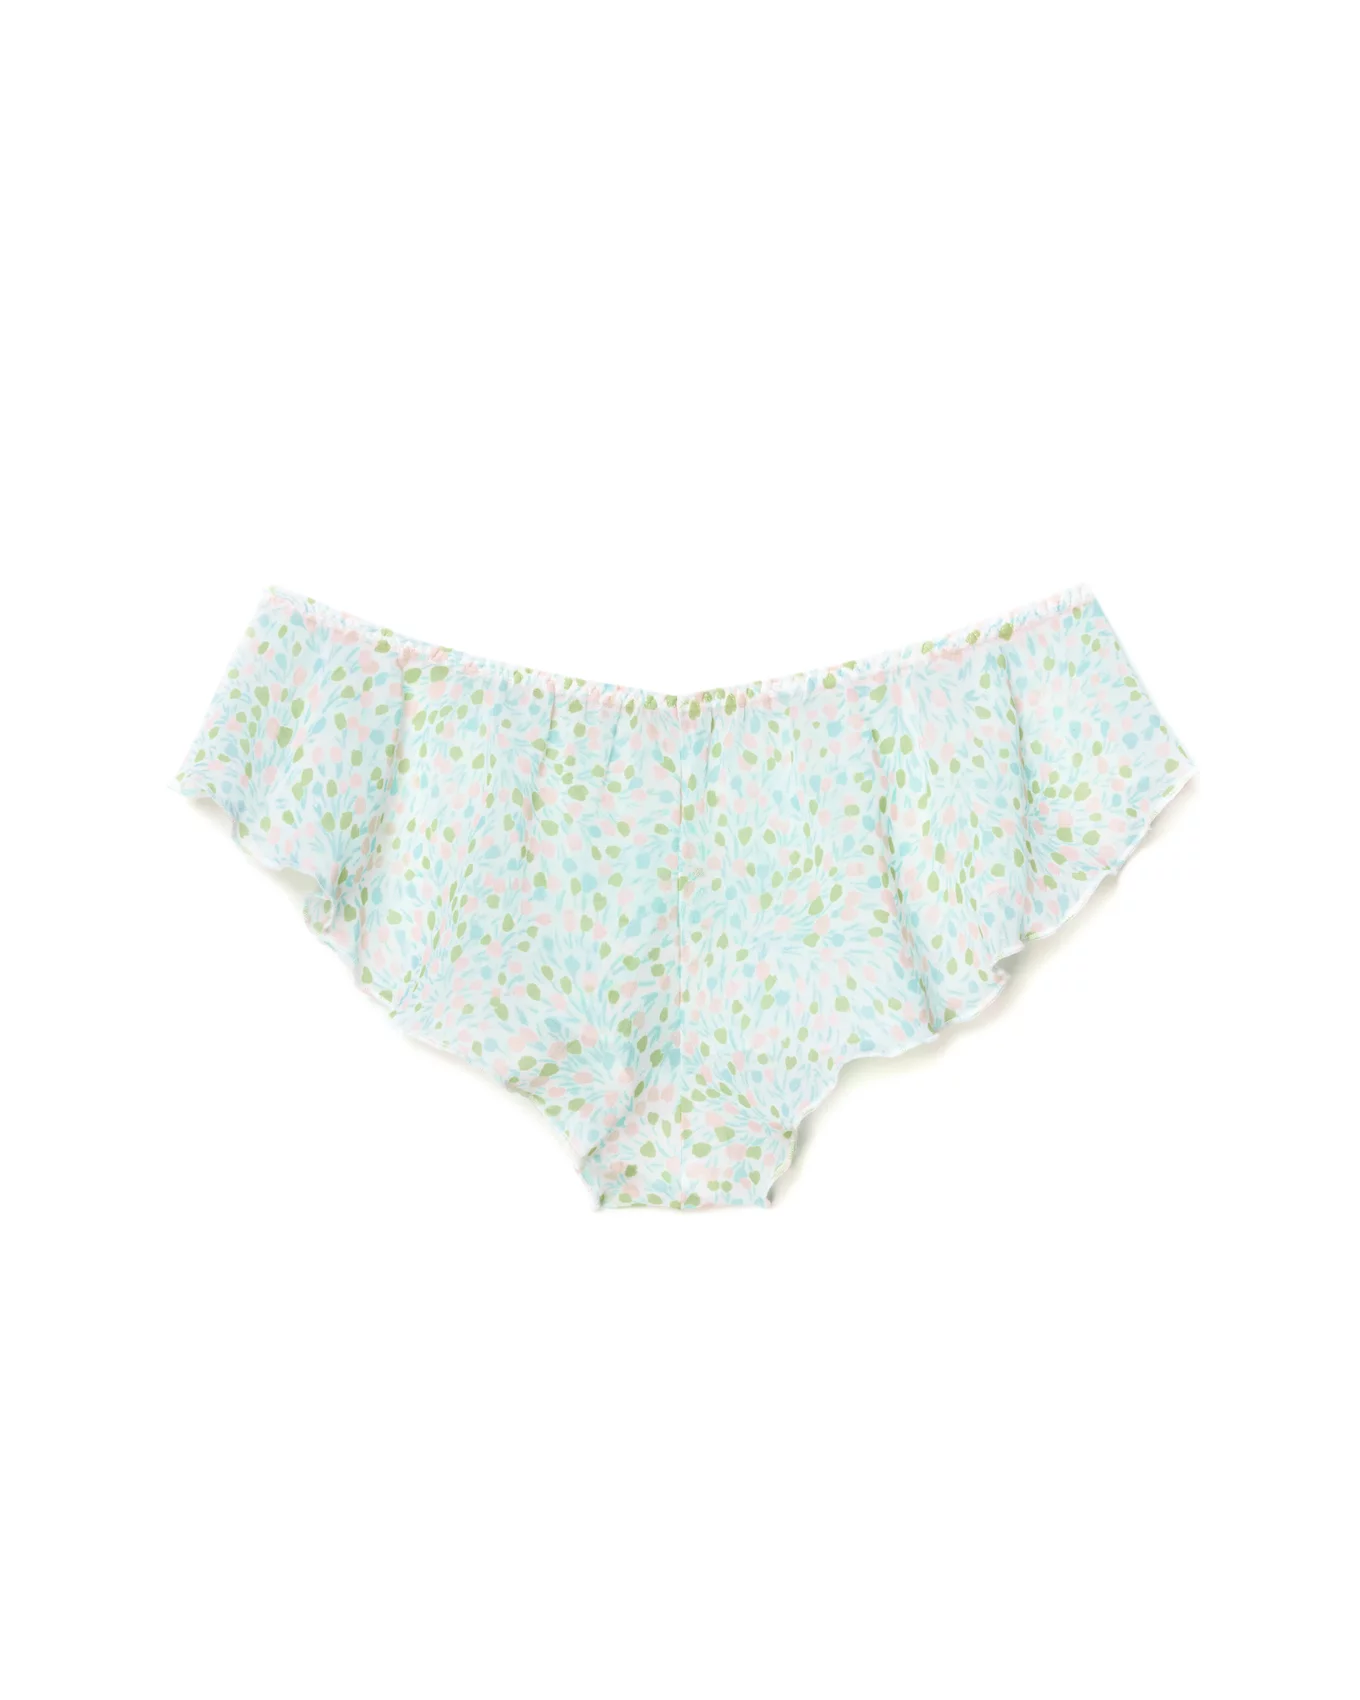 Cotton and Lace Cheeky Panty - Blue ditsy floral